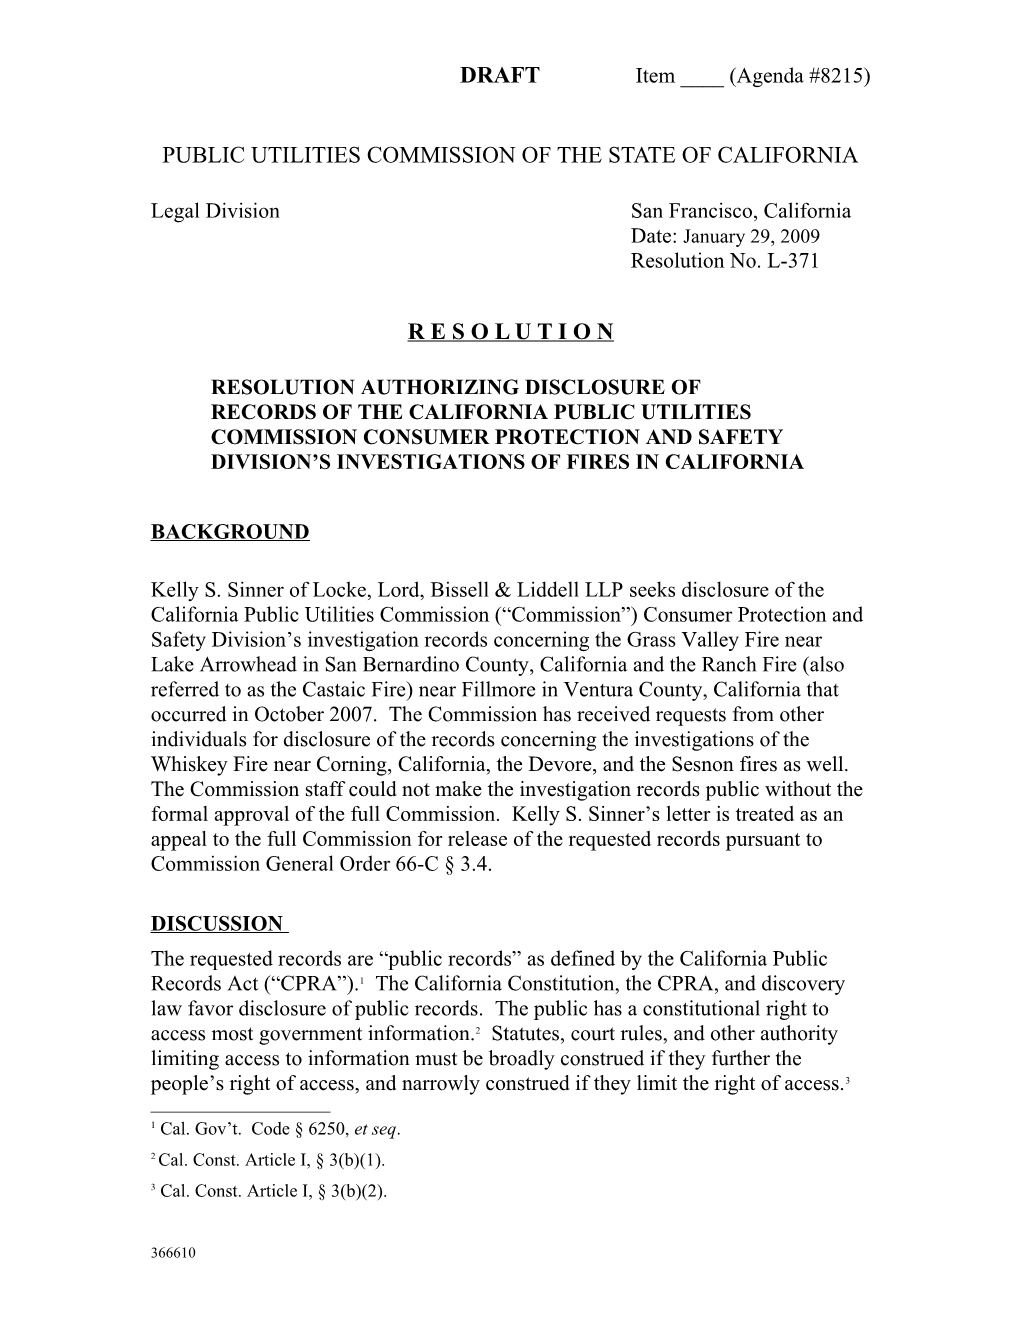 Public Utilities Commission of the State of California s87